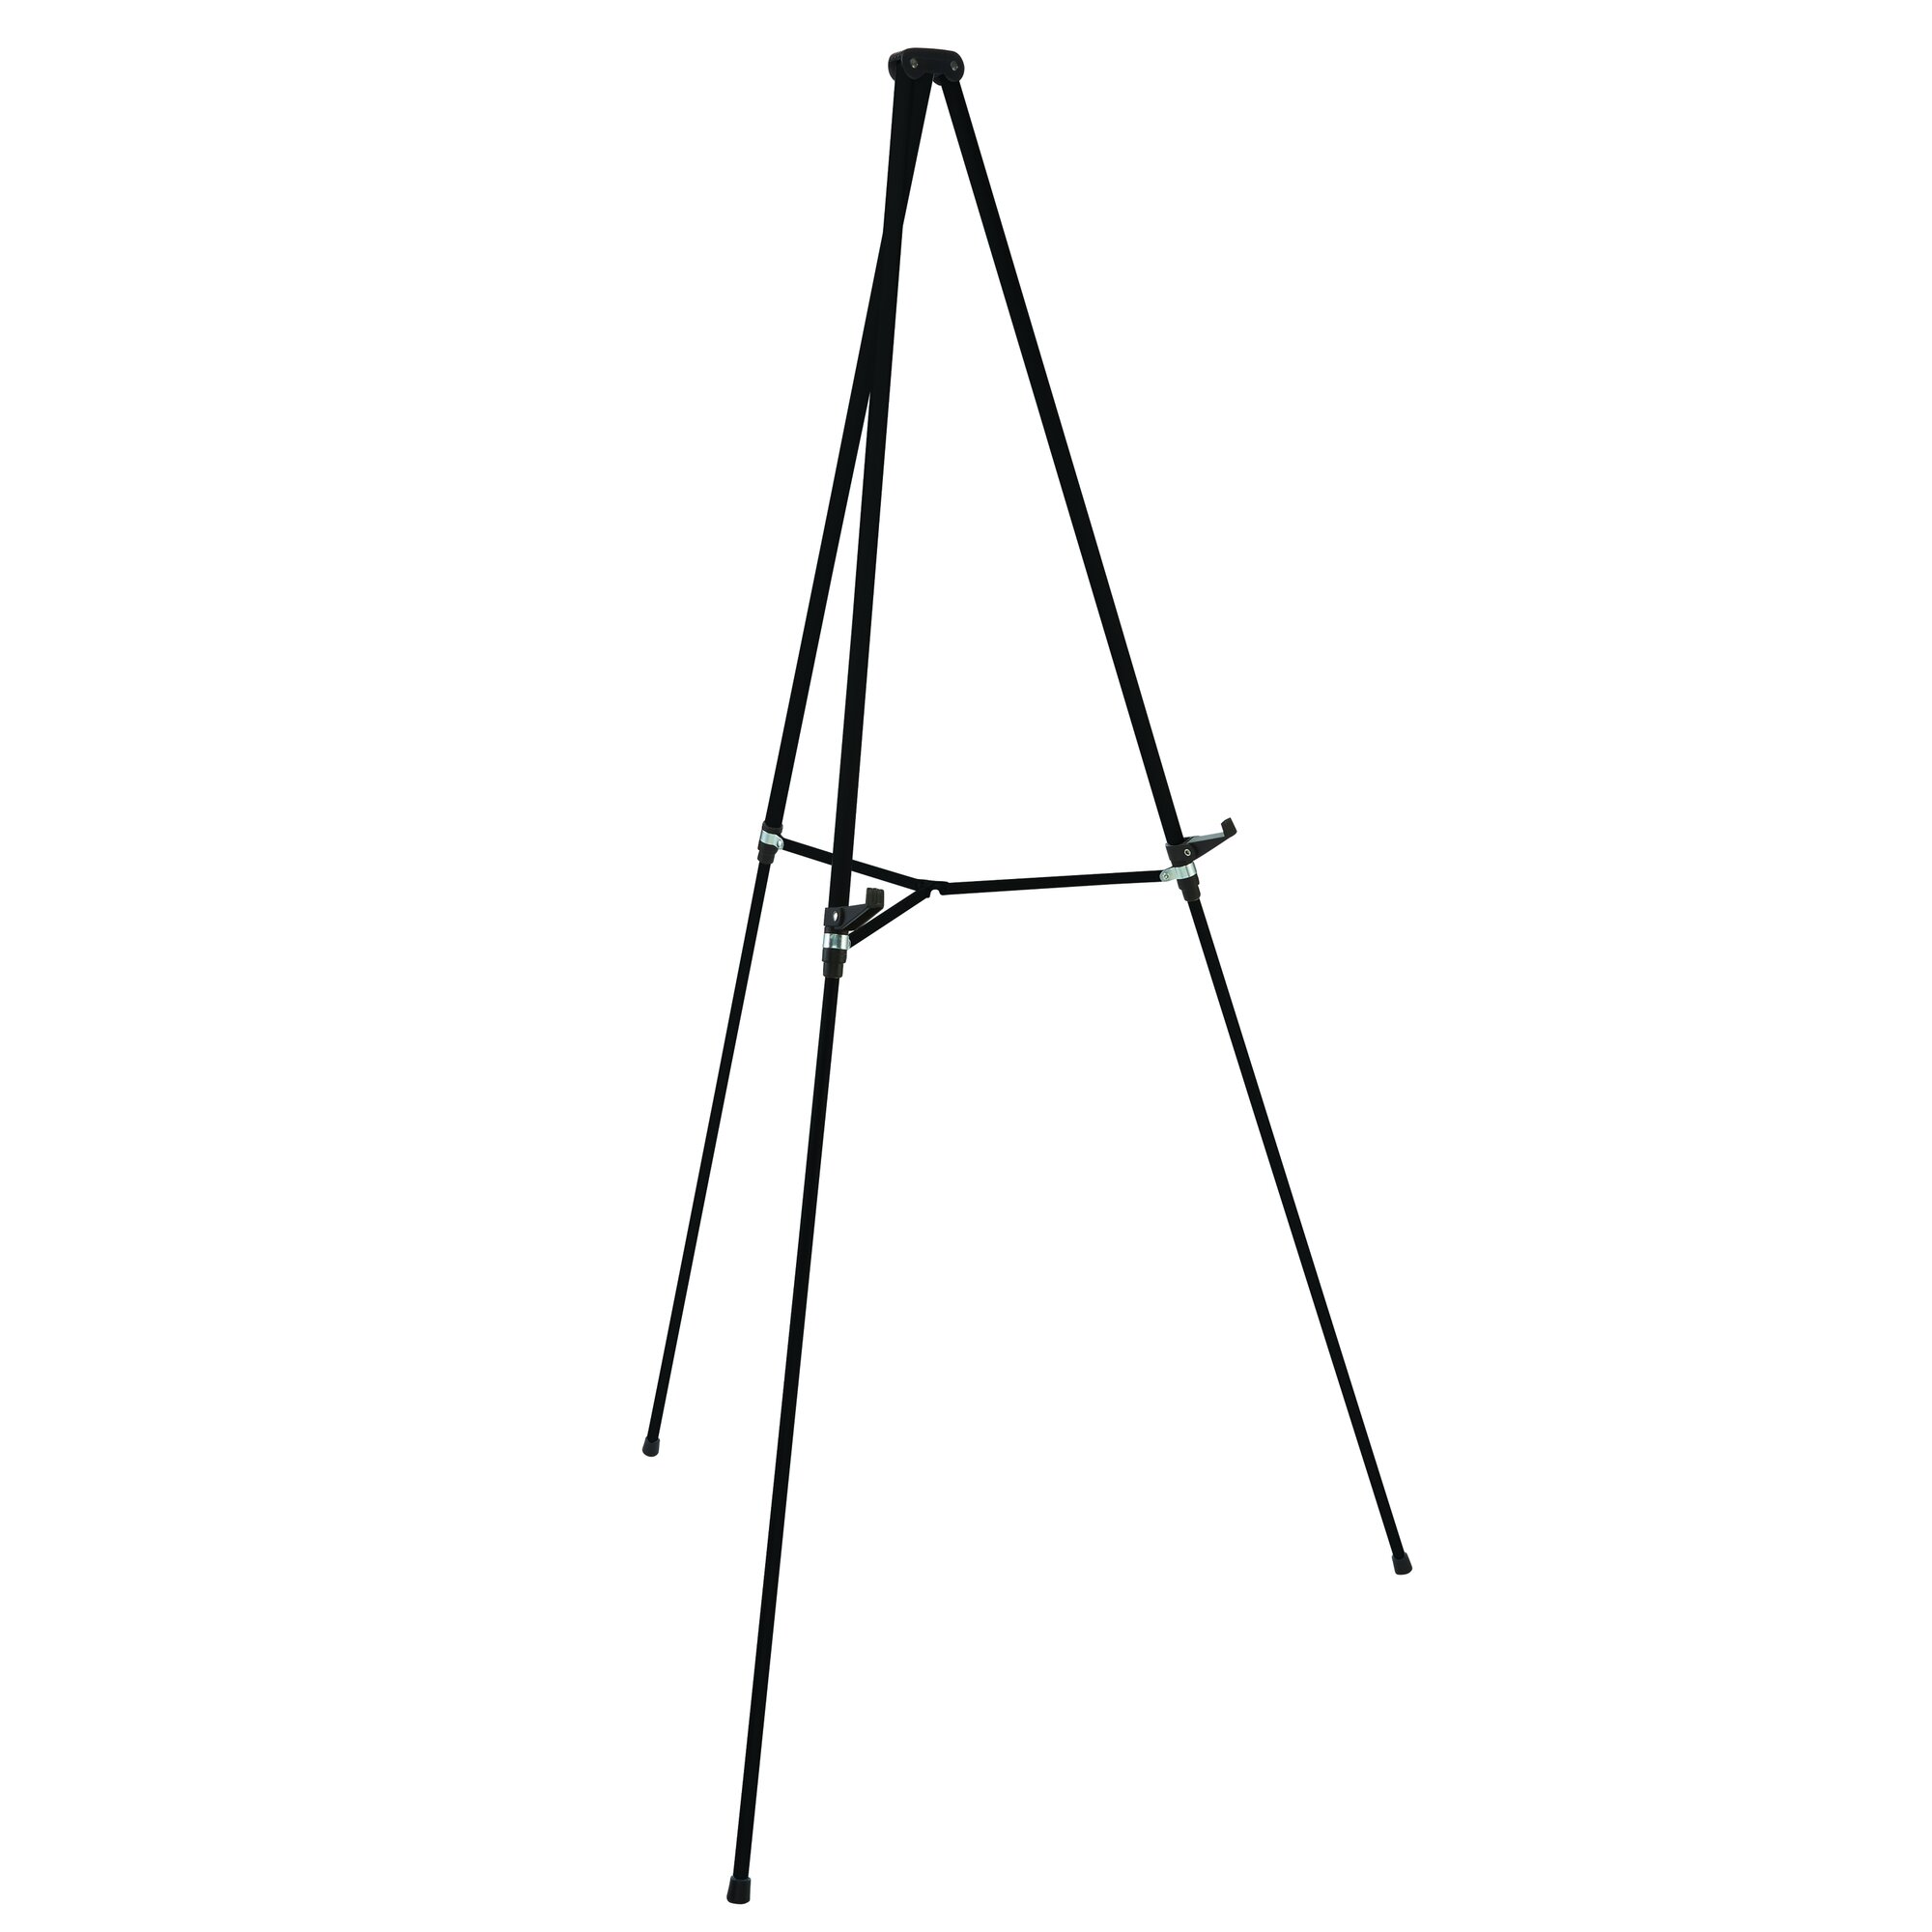 Quartet Aluminum Lightweight Telescoping Display Easel 66 Supports 25 lbs Black - image 1 of 3